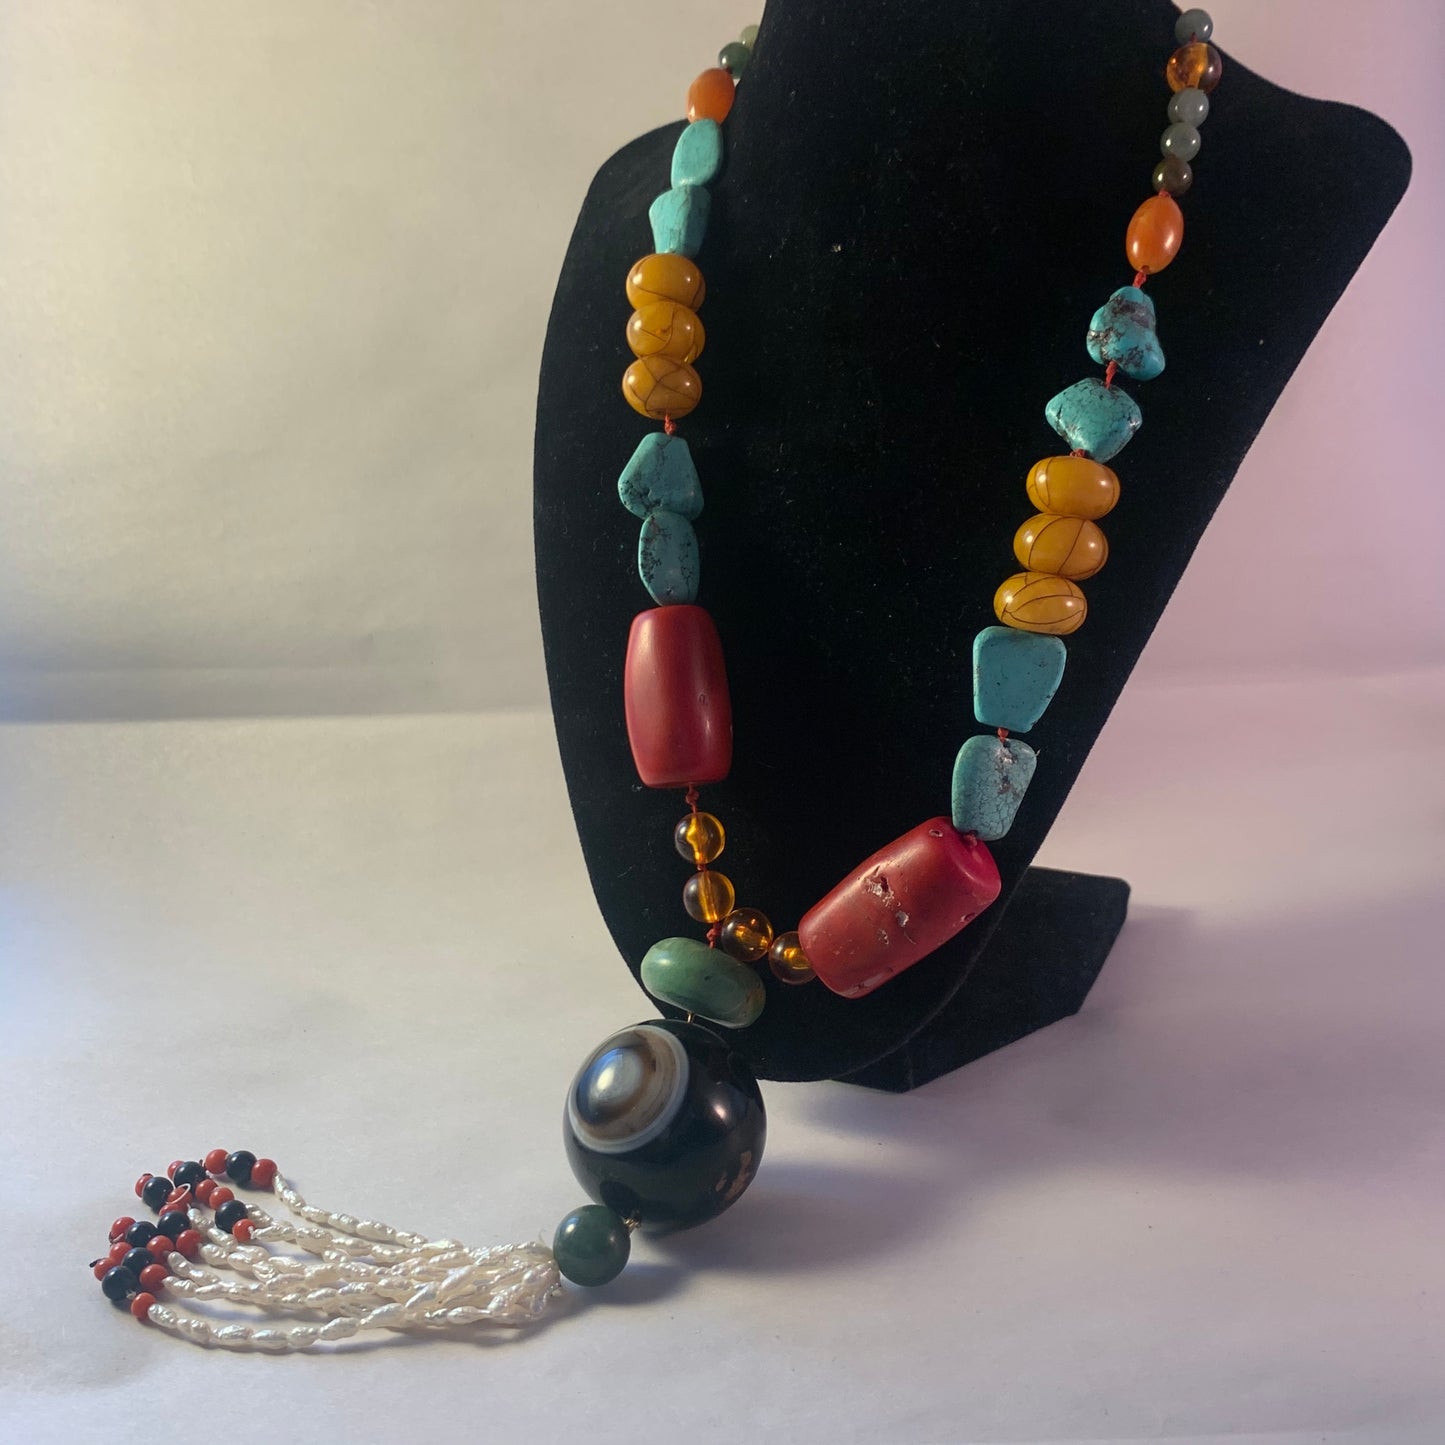 A boho necklace with vintage beads